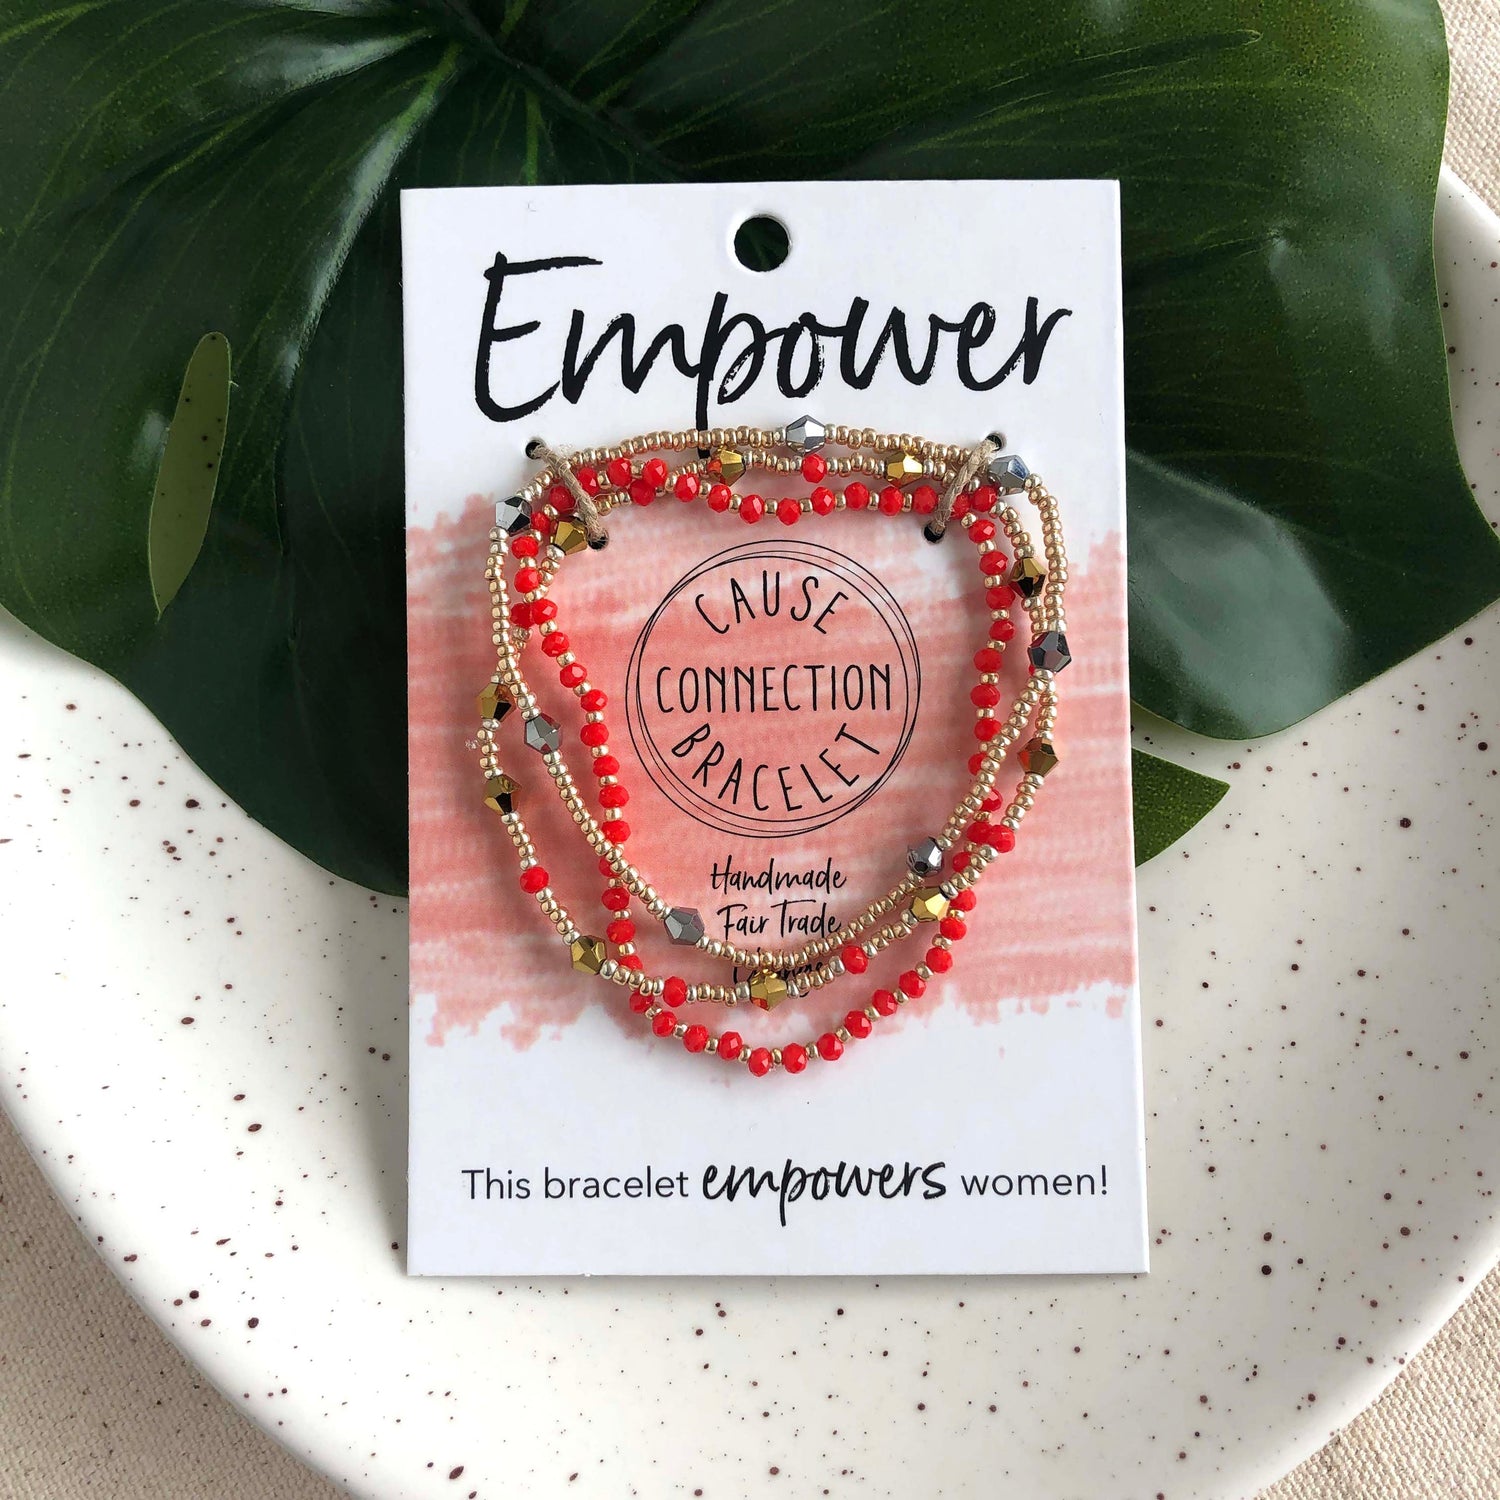 Image of the Cause Connection Bracelet, in the Empower theme.